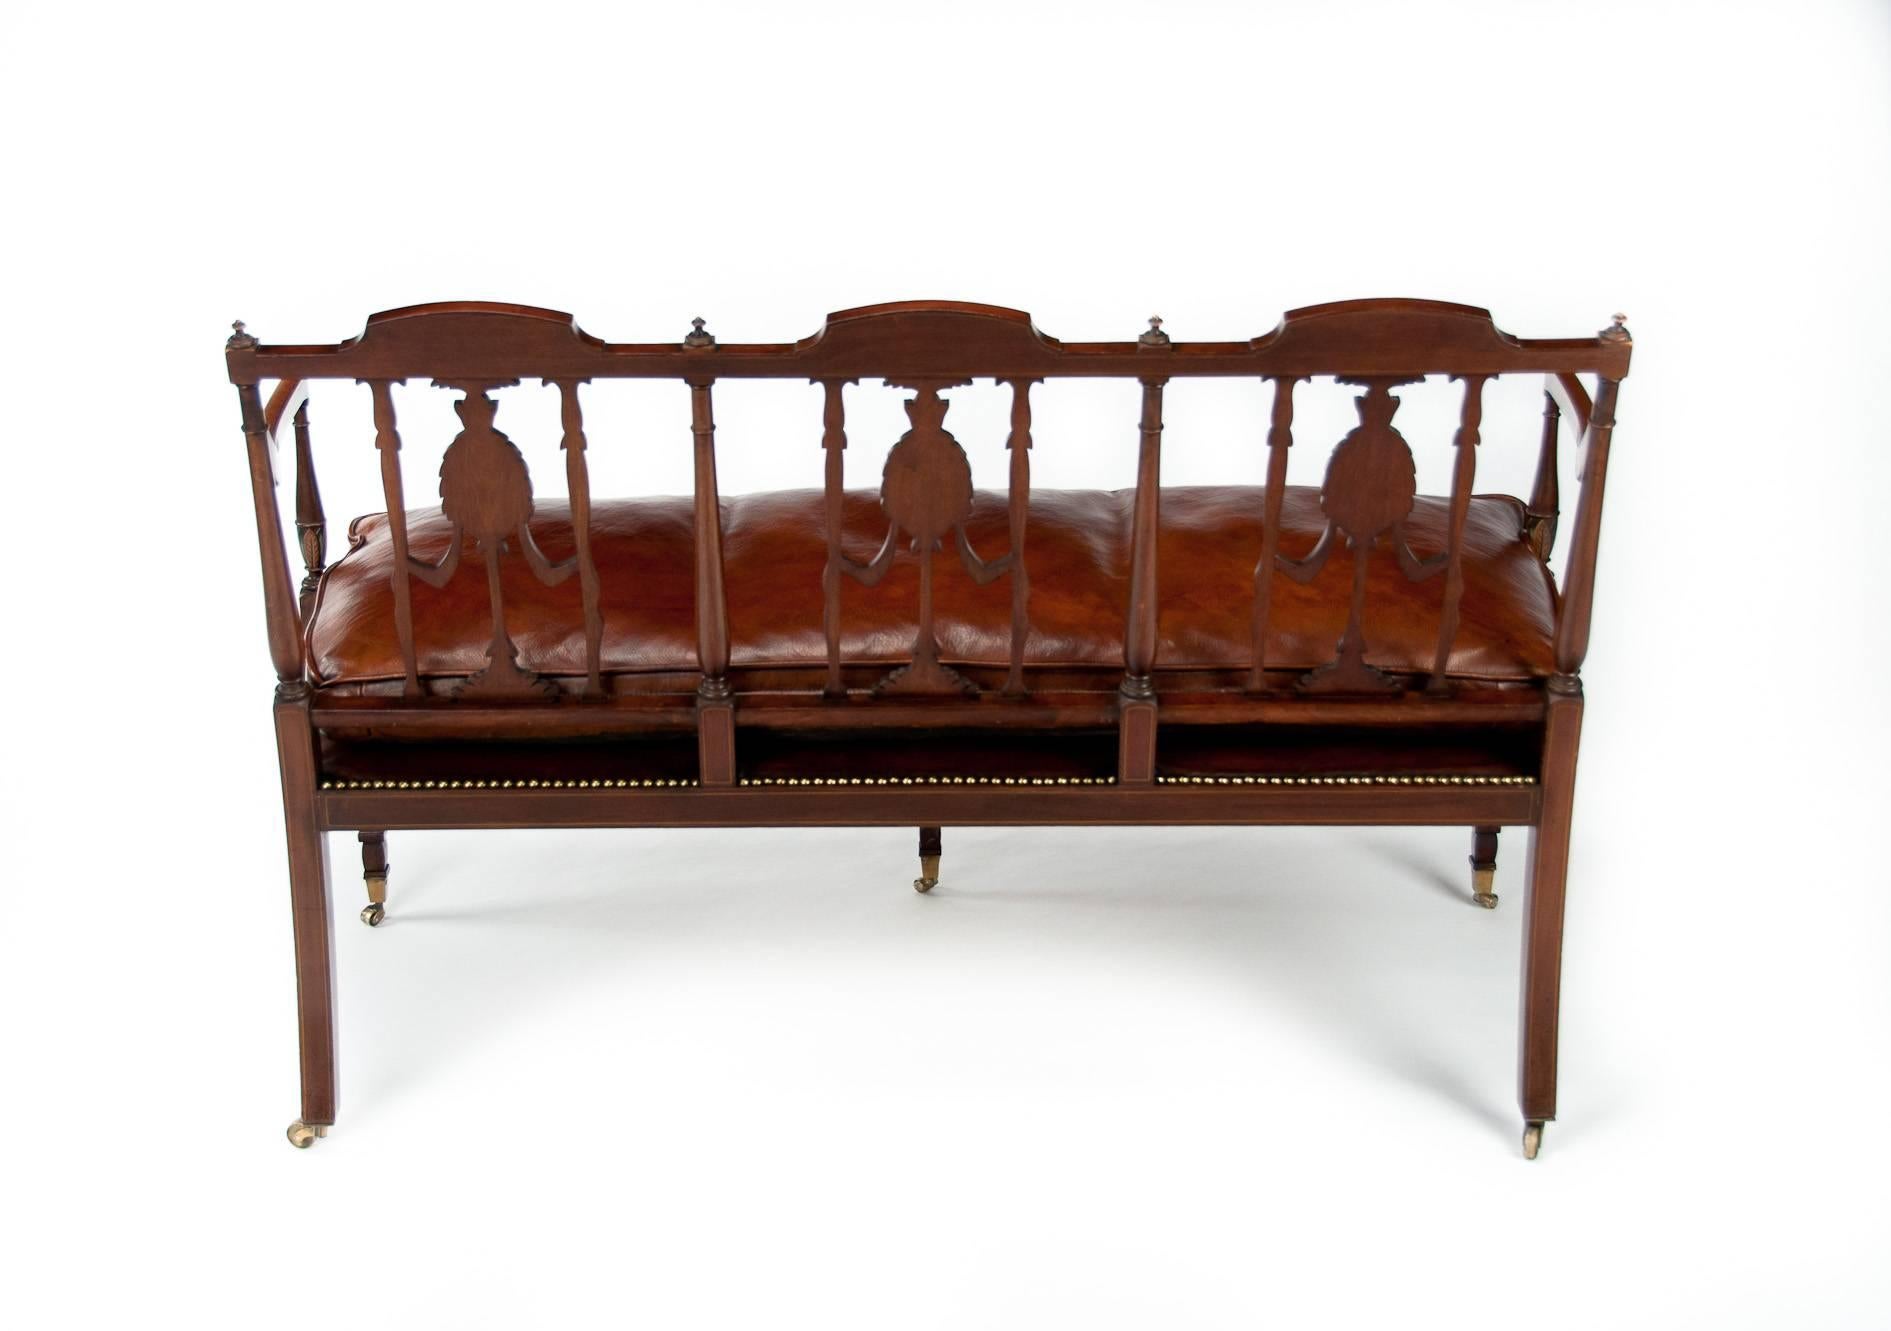 Fine Edwardian Inlaid and Neoclassical Style Painted Leather Settee 4